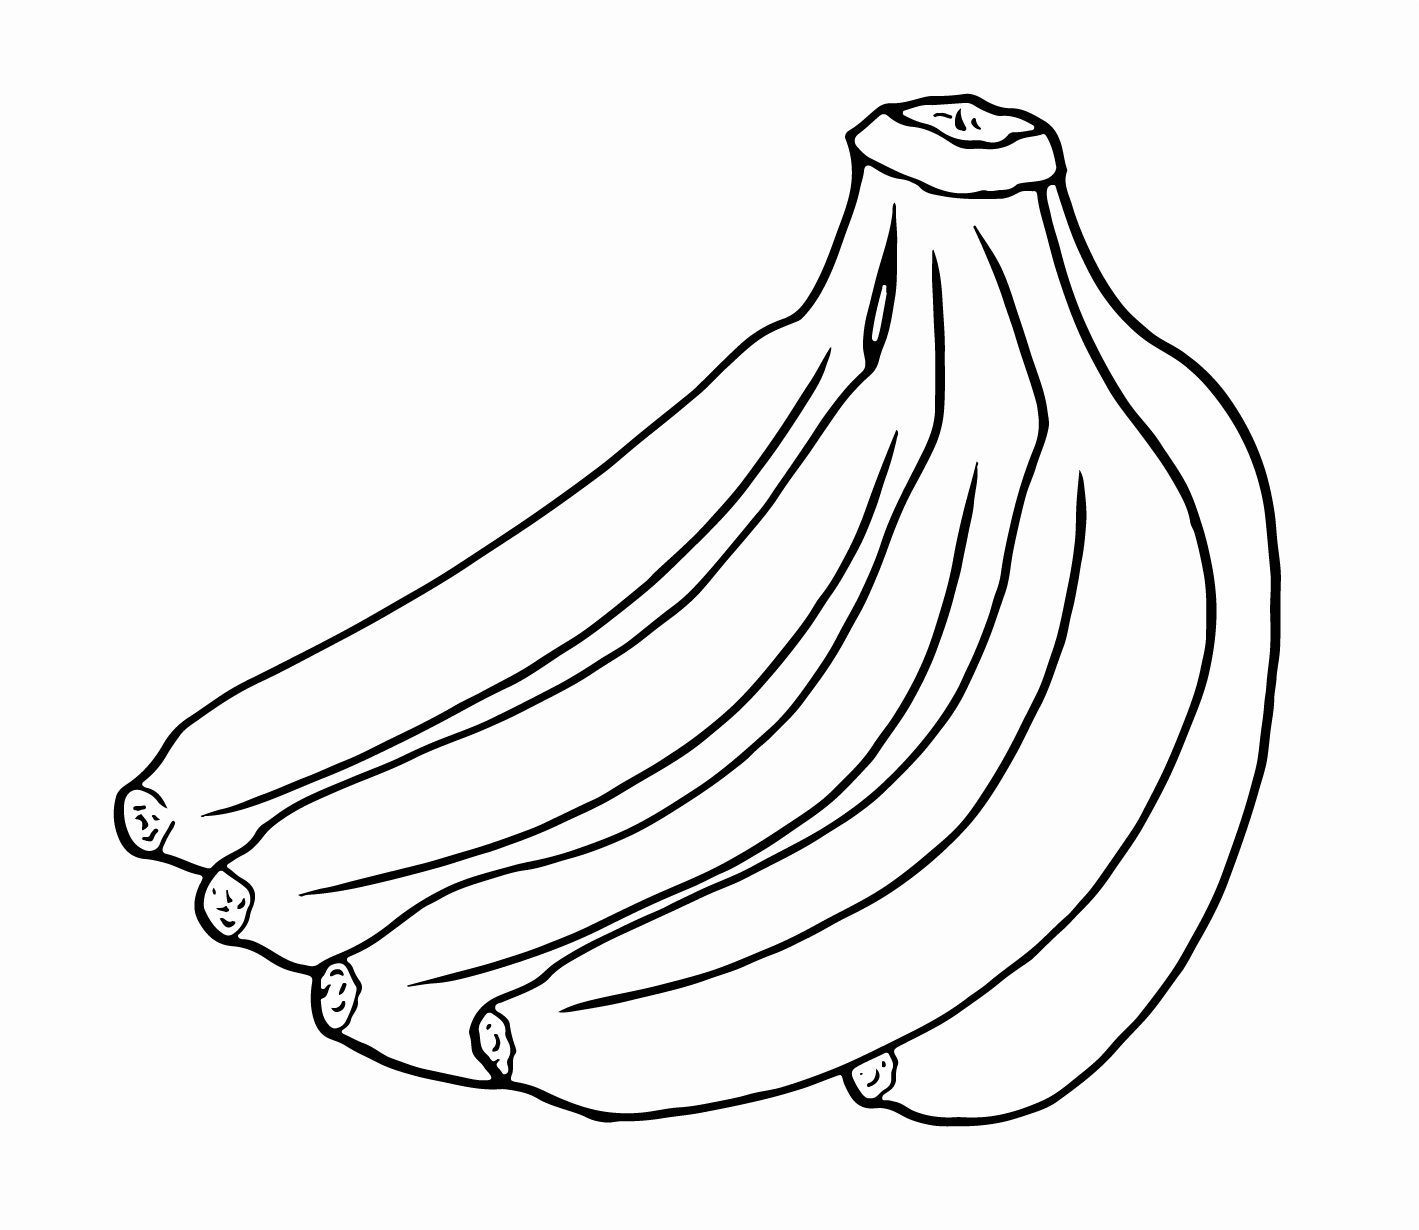 banana outline clipart drawing